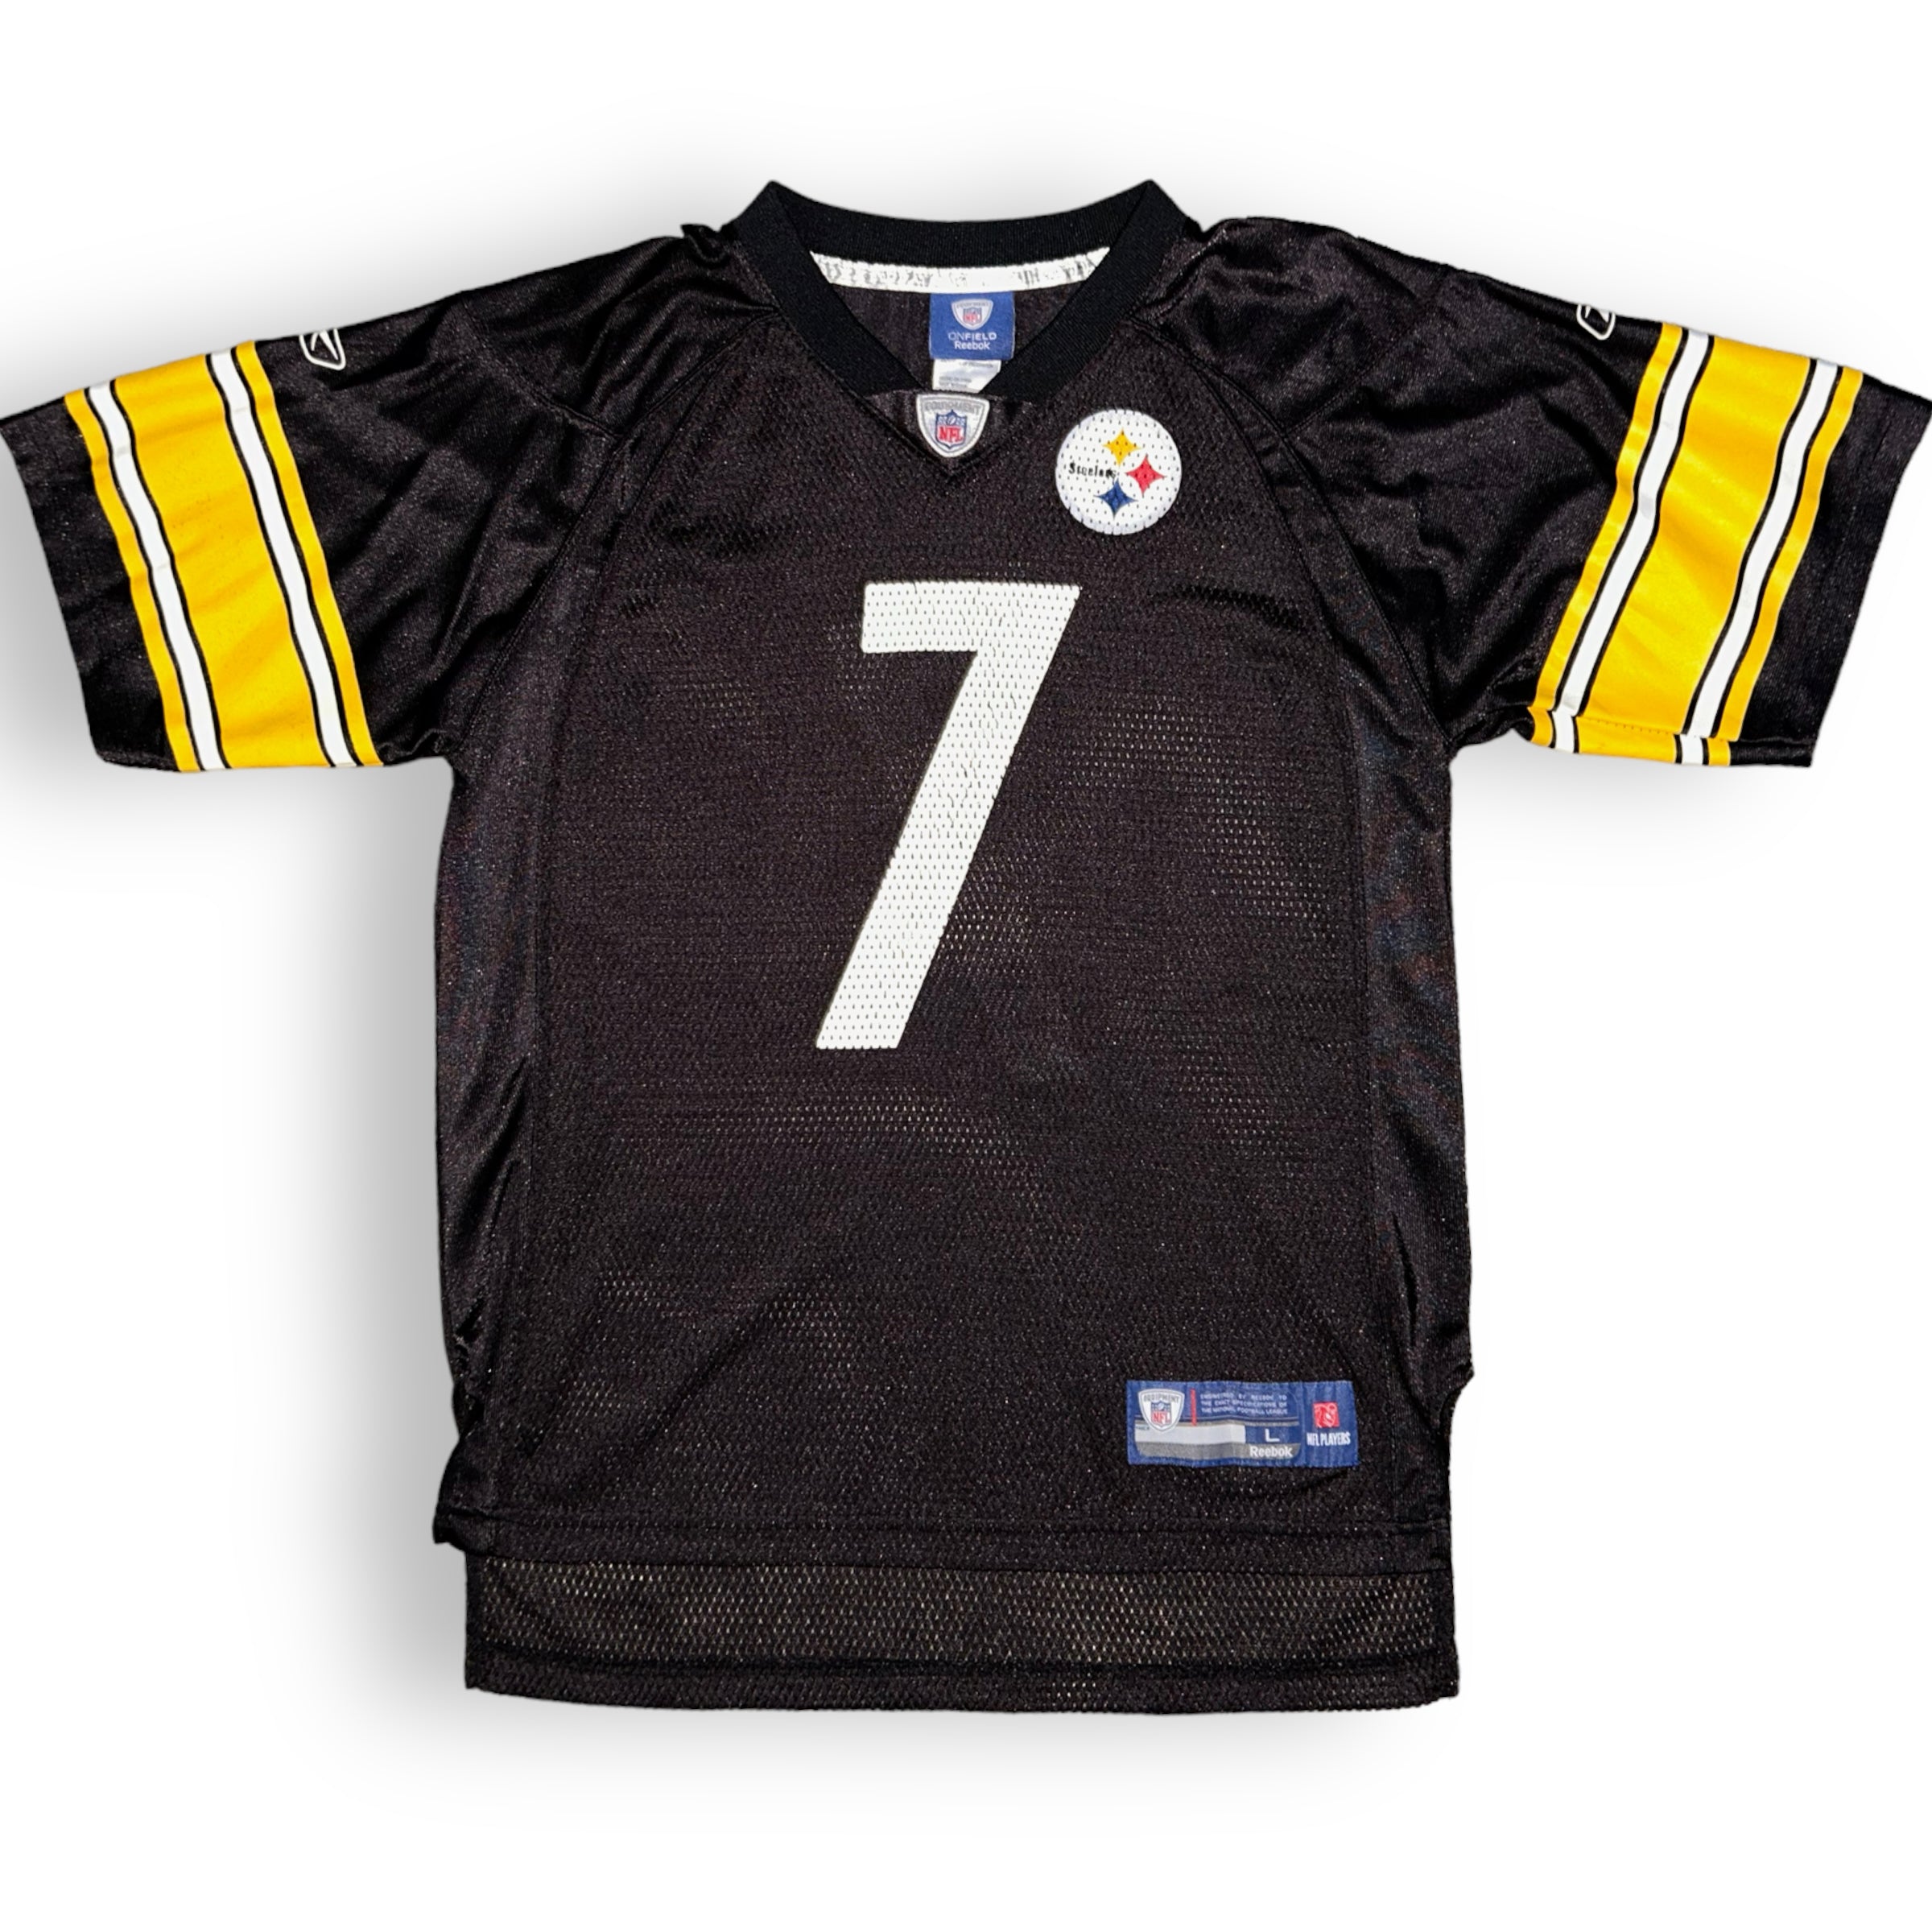 Jersey Pittsburgh Steelers NFL (S)